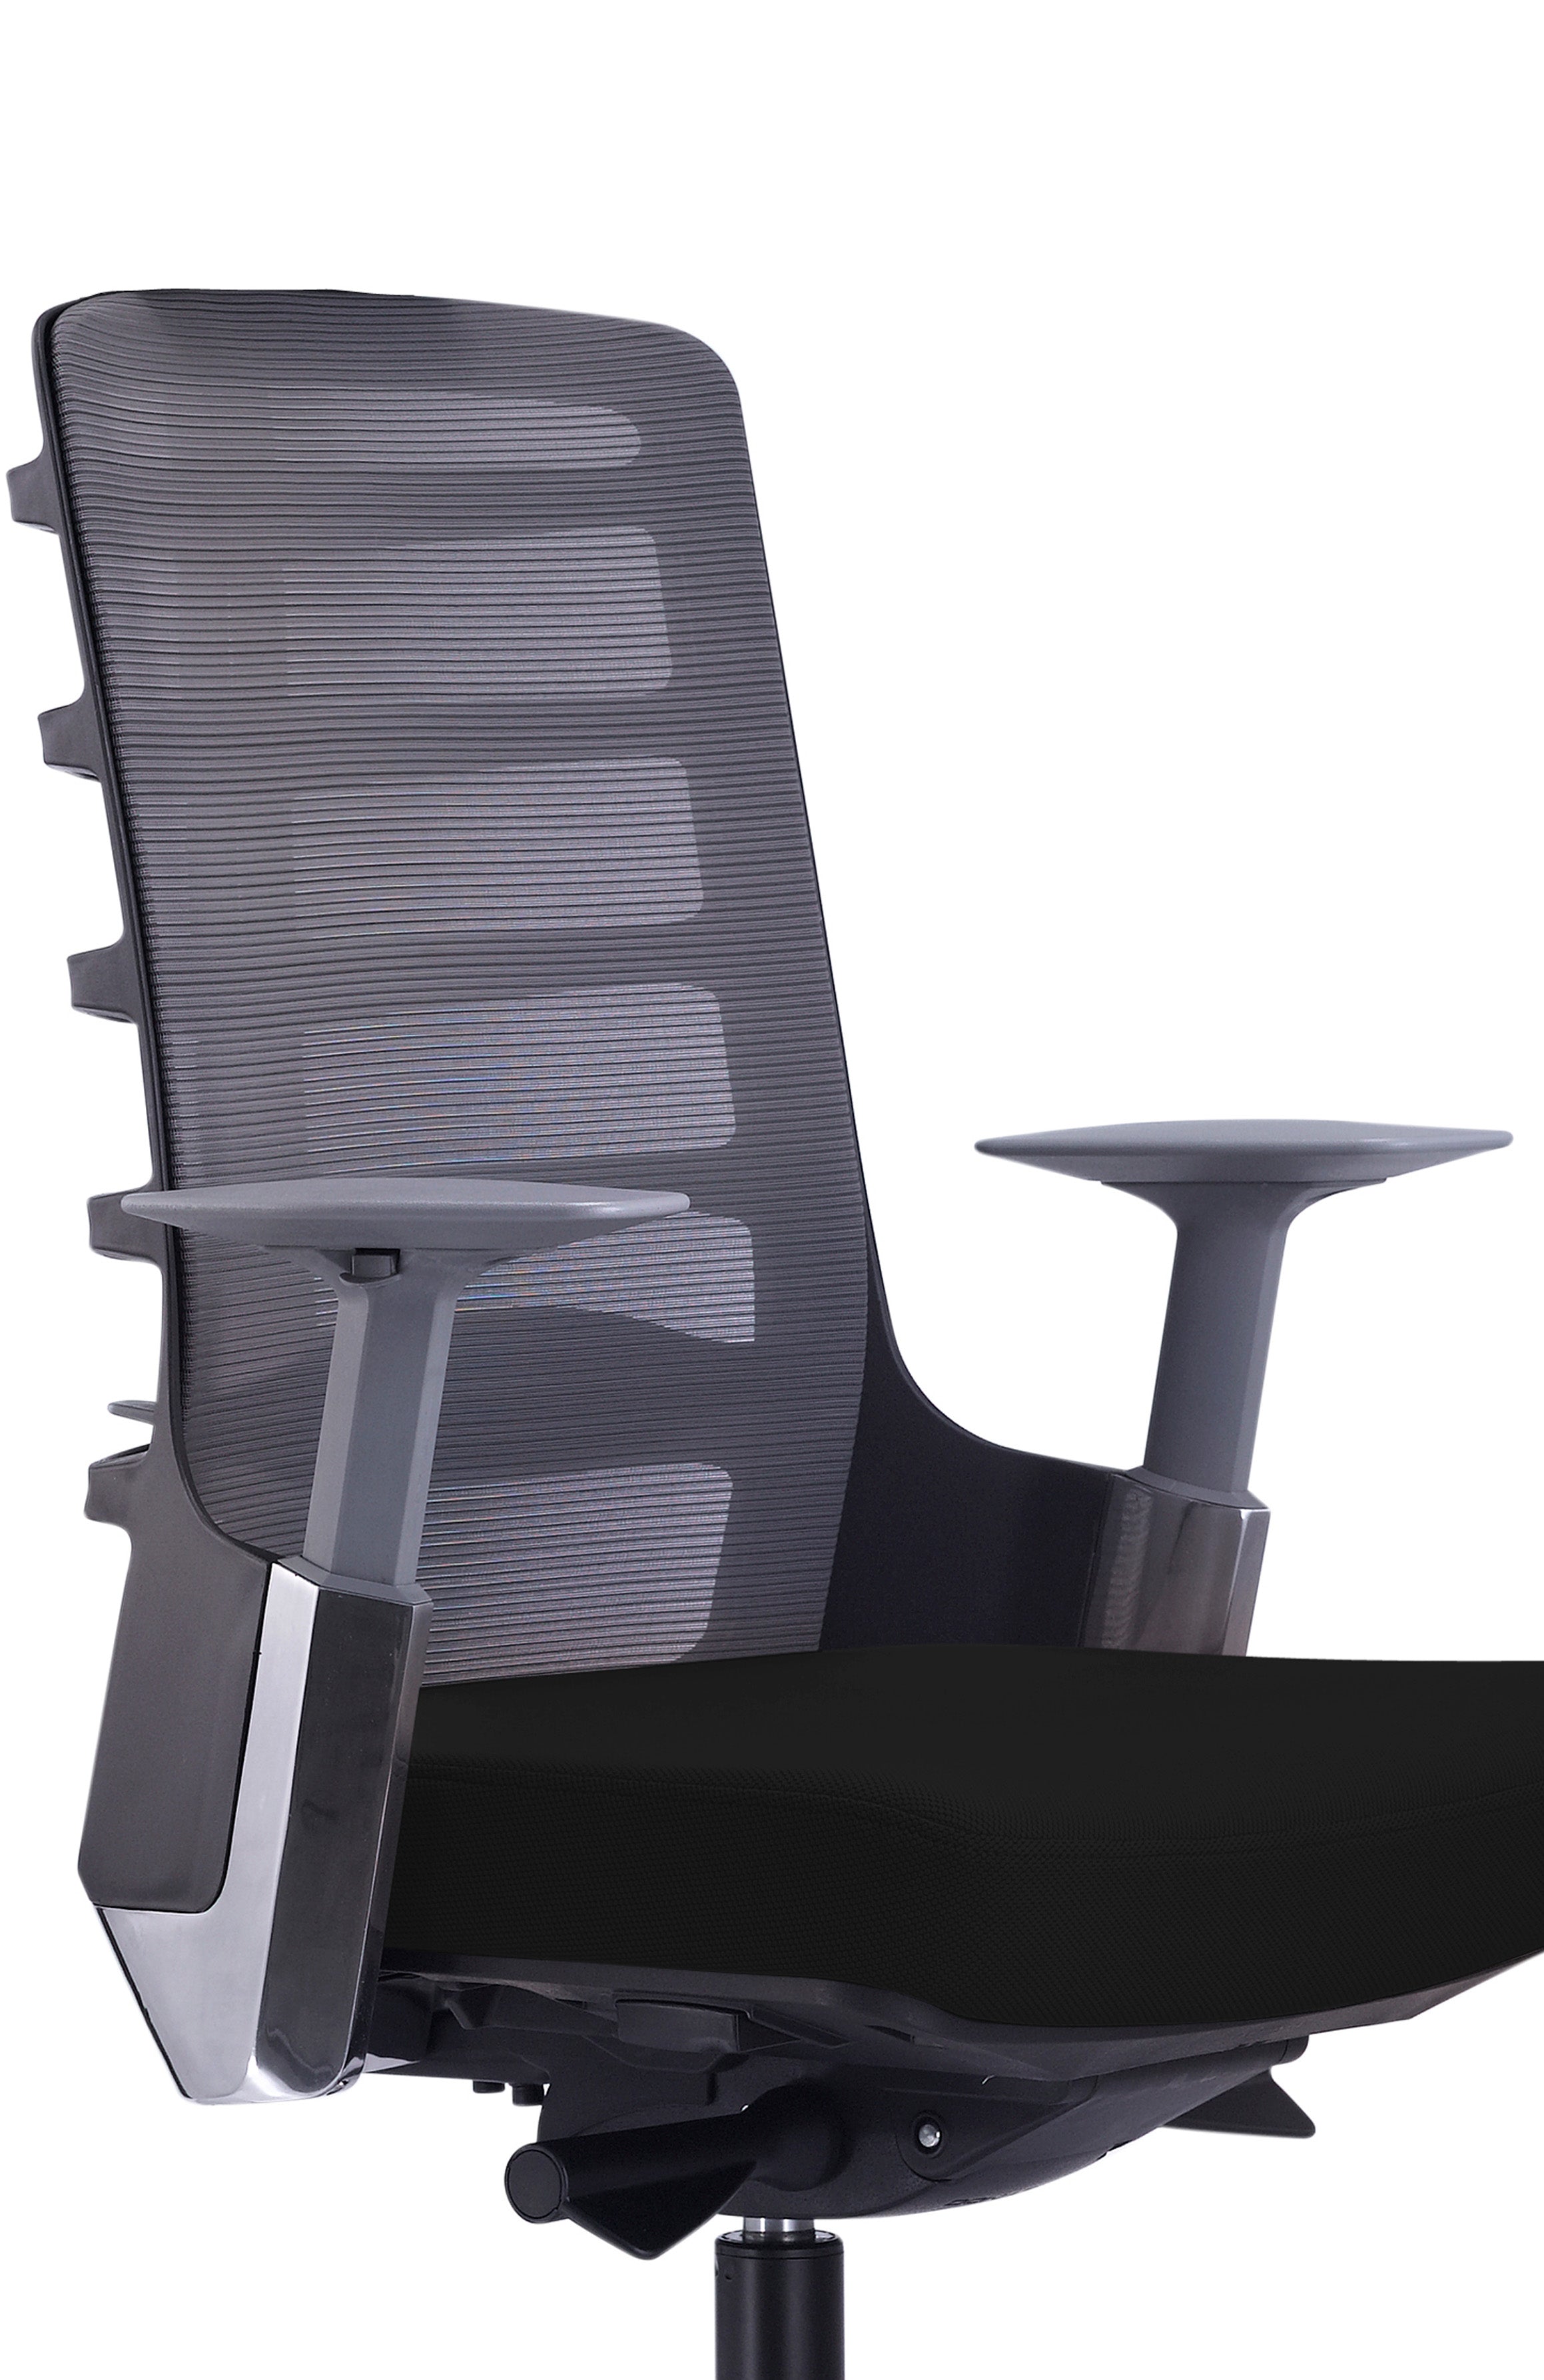 ZNTS 38 H x 17 W x 20 D Black Fabric Midback Mesh Chair with Lumbar Support, Commercial Grade B085114708